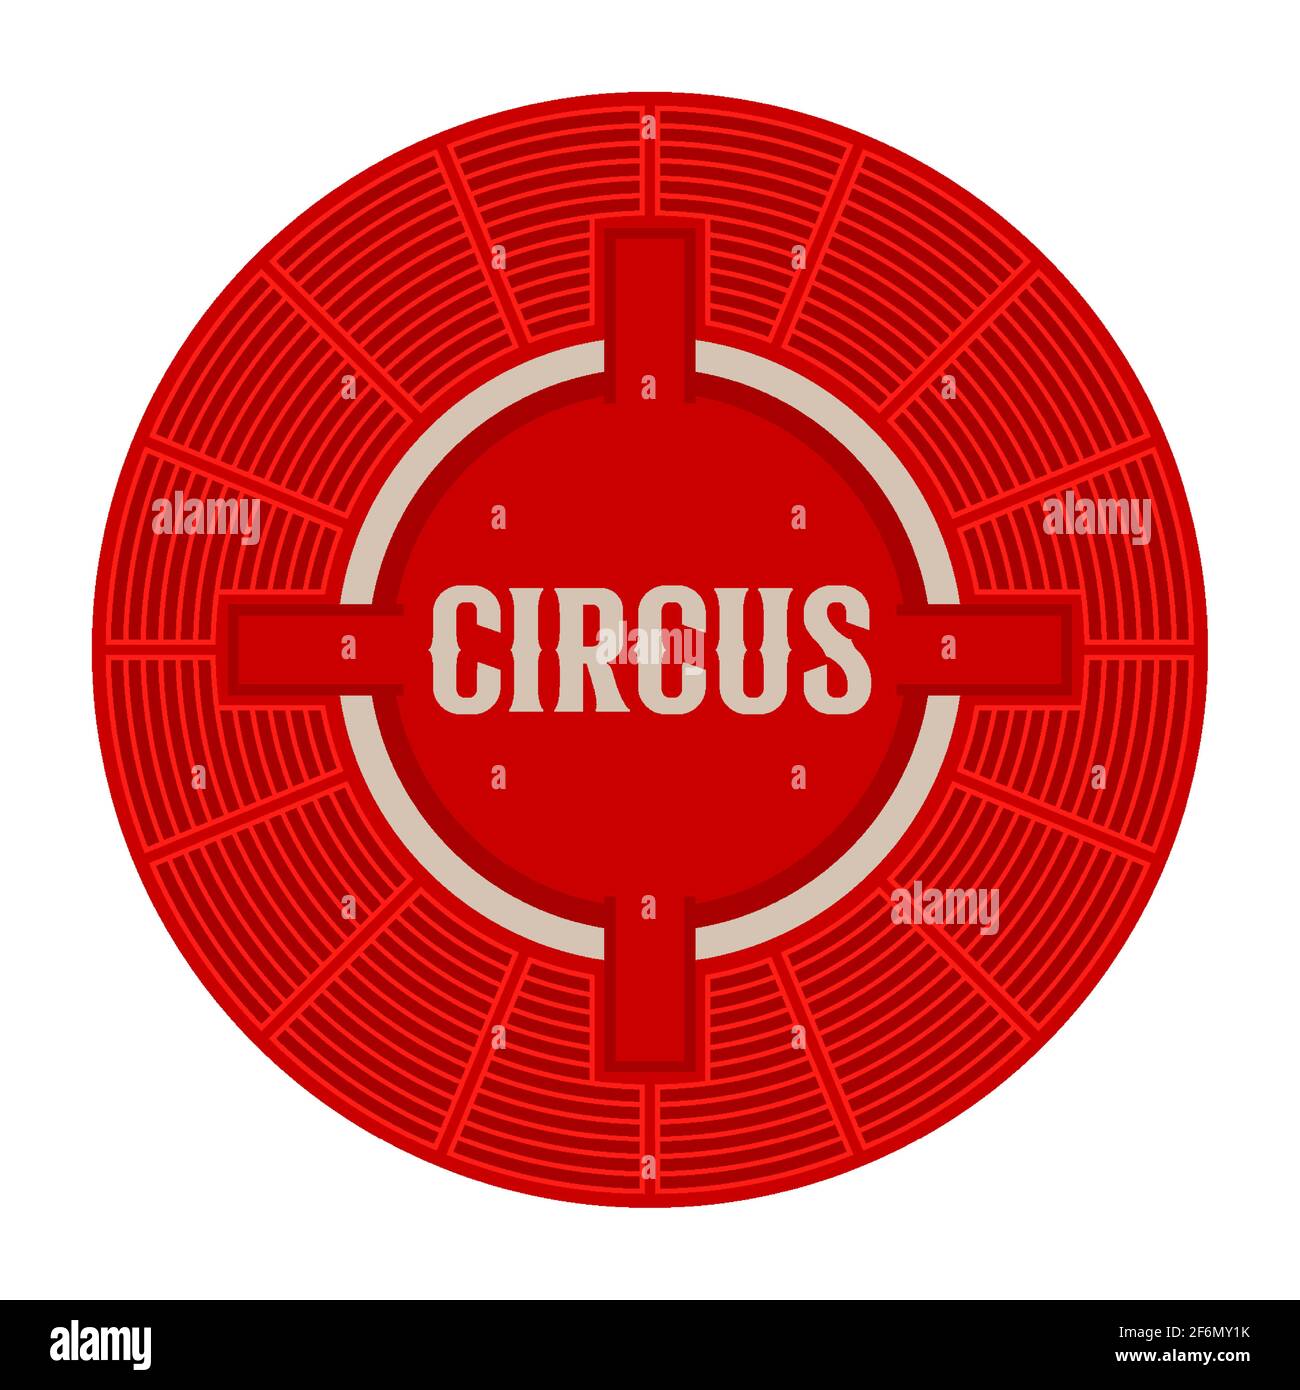 Circus red round circle emblem. Circus seats top view. Vintage circus font. Vector illustration isolated on white. Stock Vector